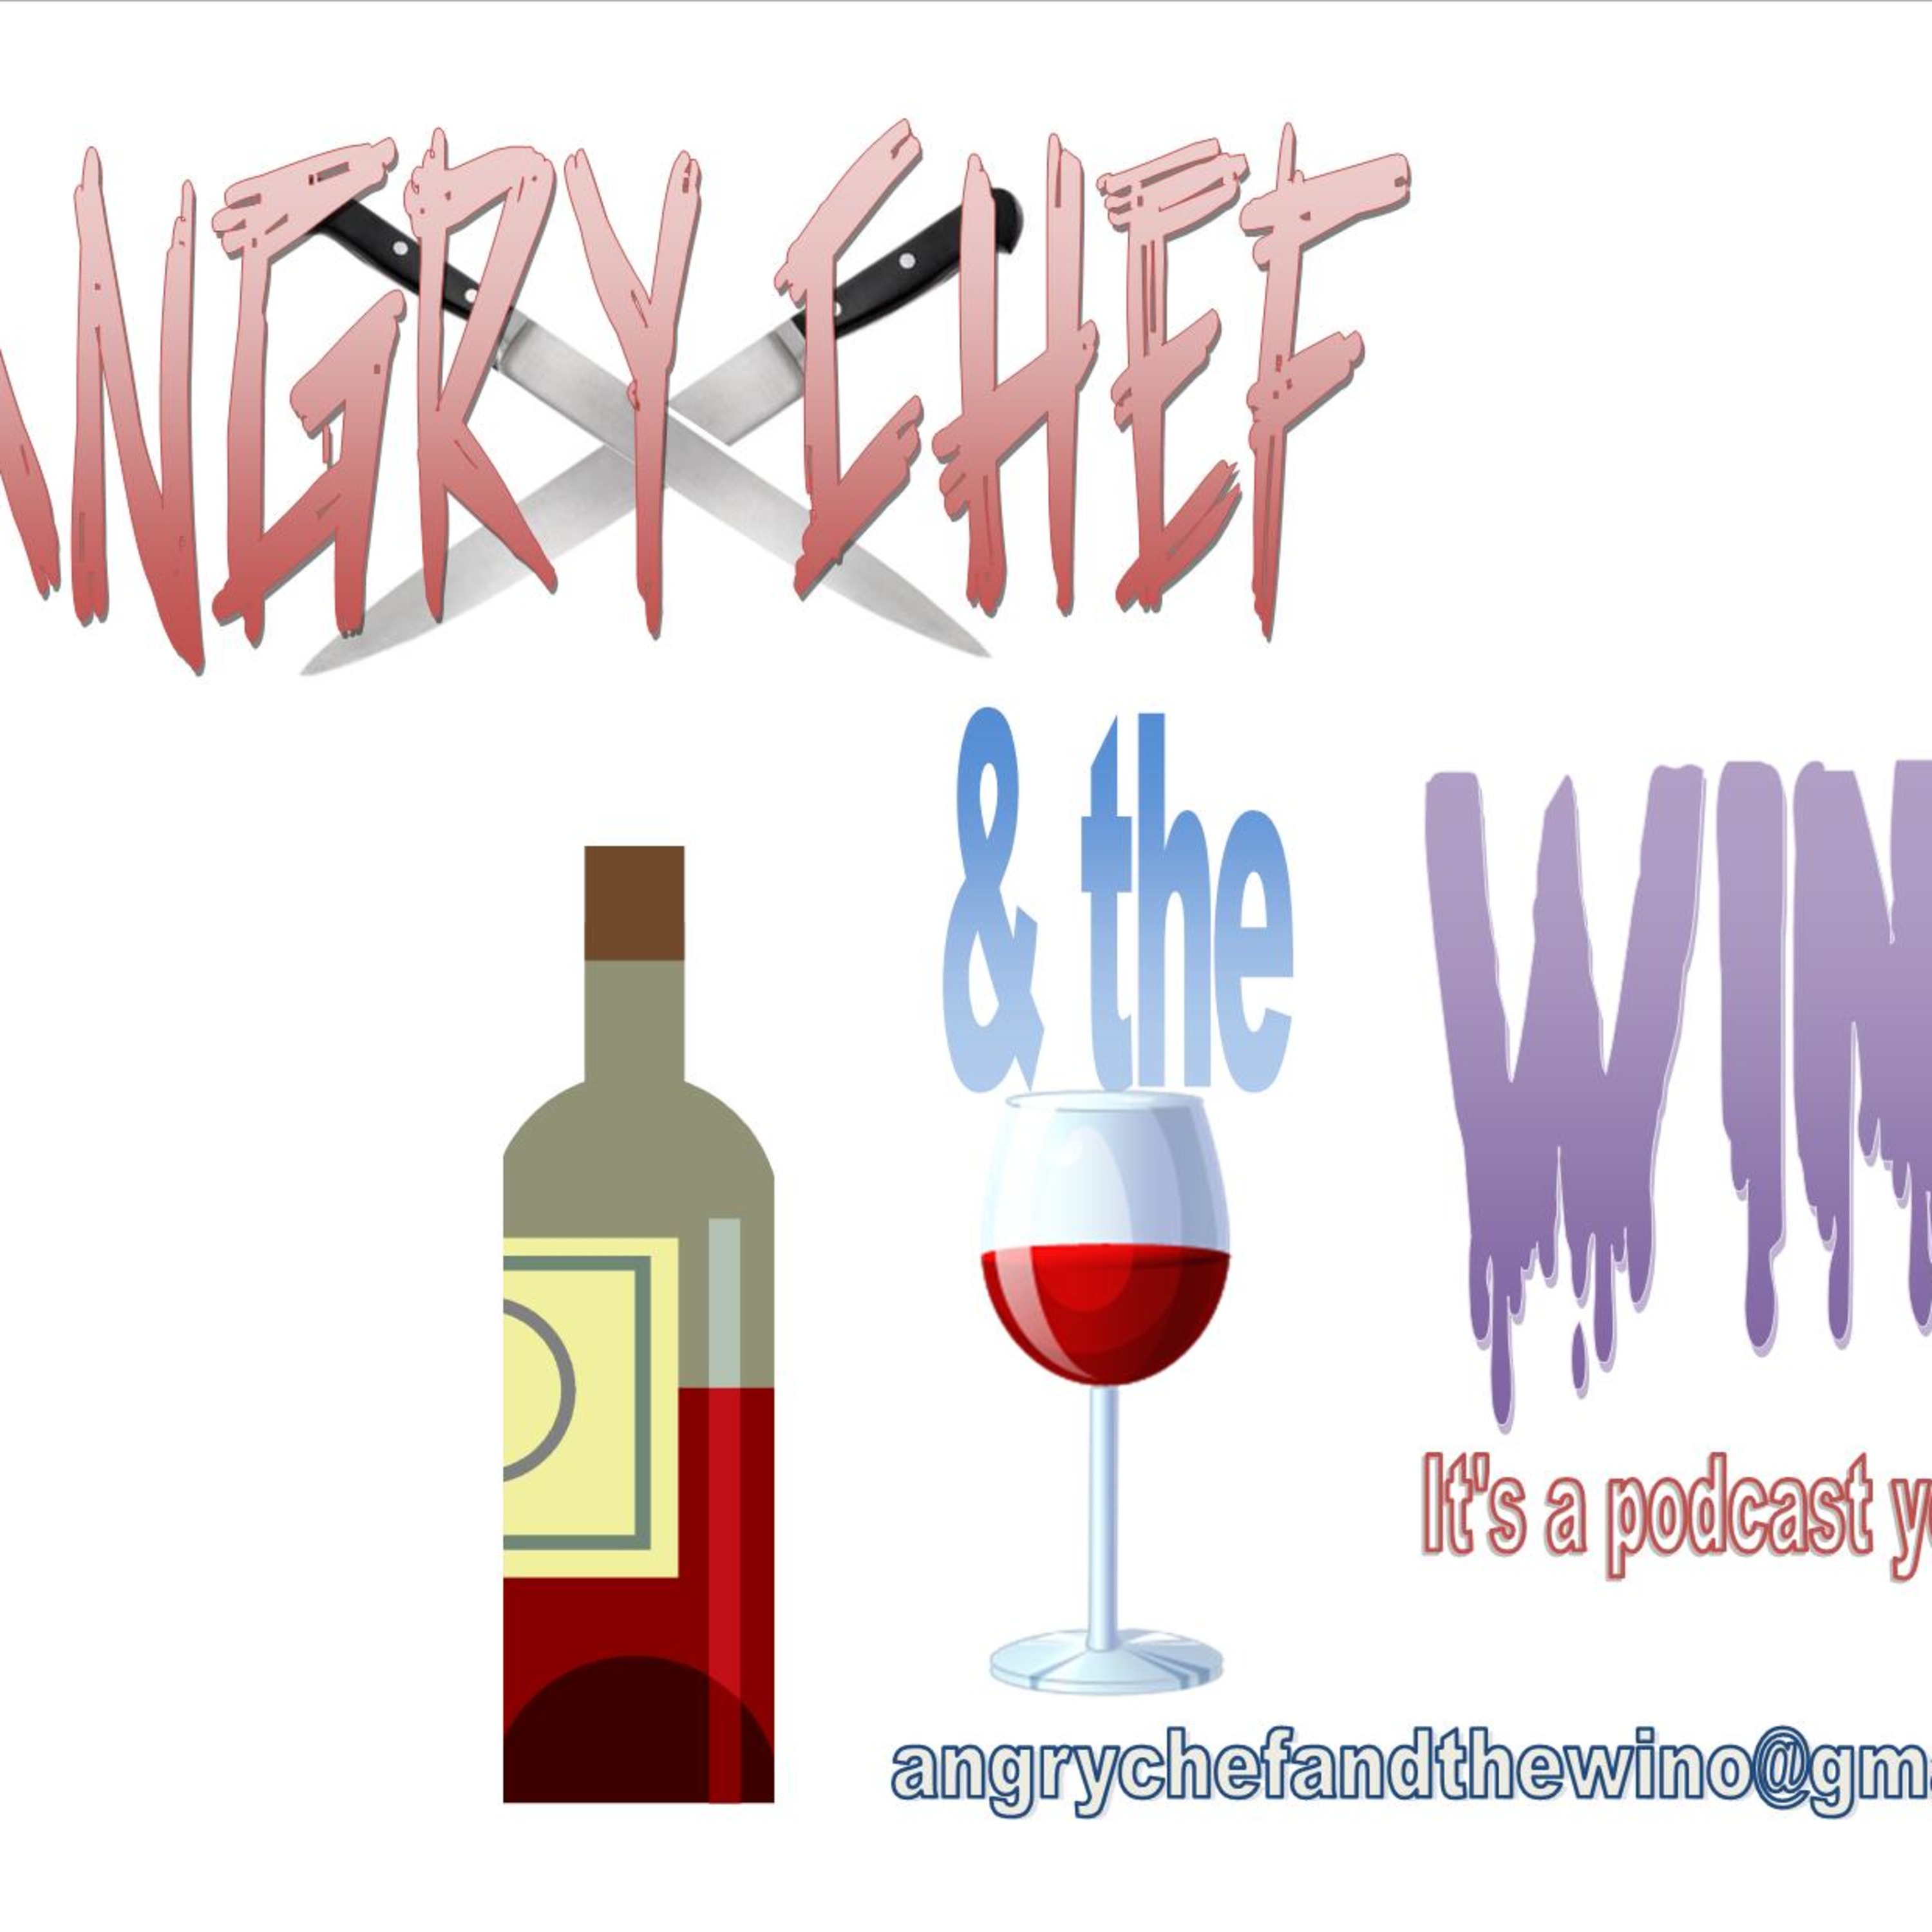 Angry Chef and the Wino: Episode 25, Forty is the new Thirty